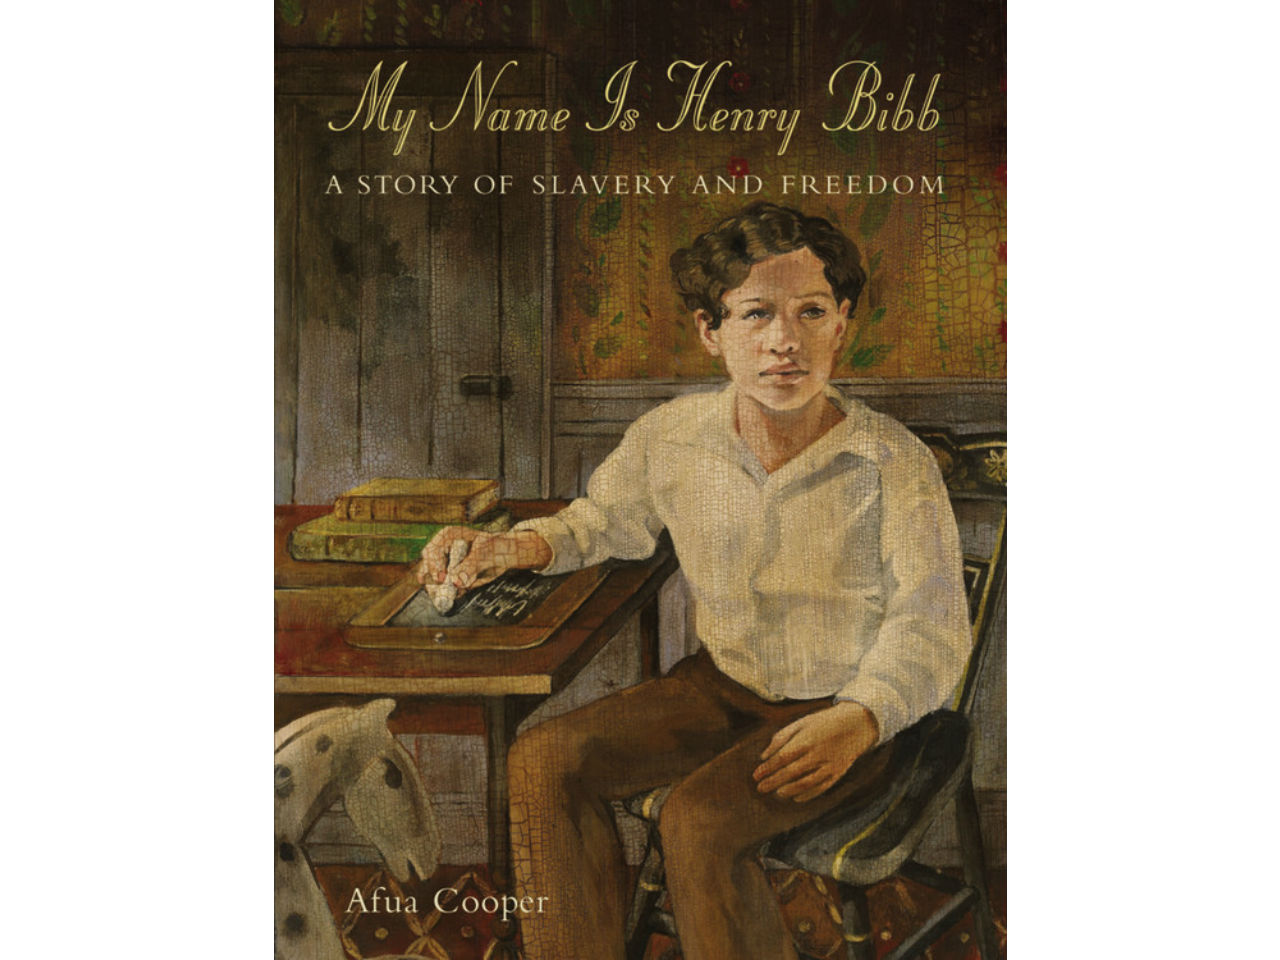 My name is Henry Bibb: A Story of Slavery and Freedom